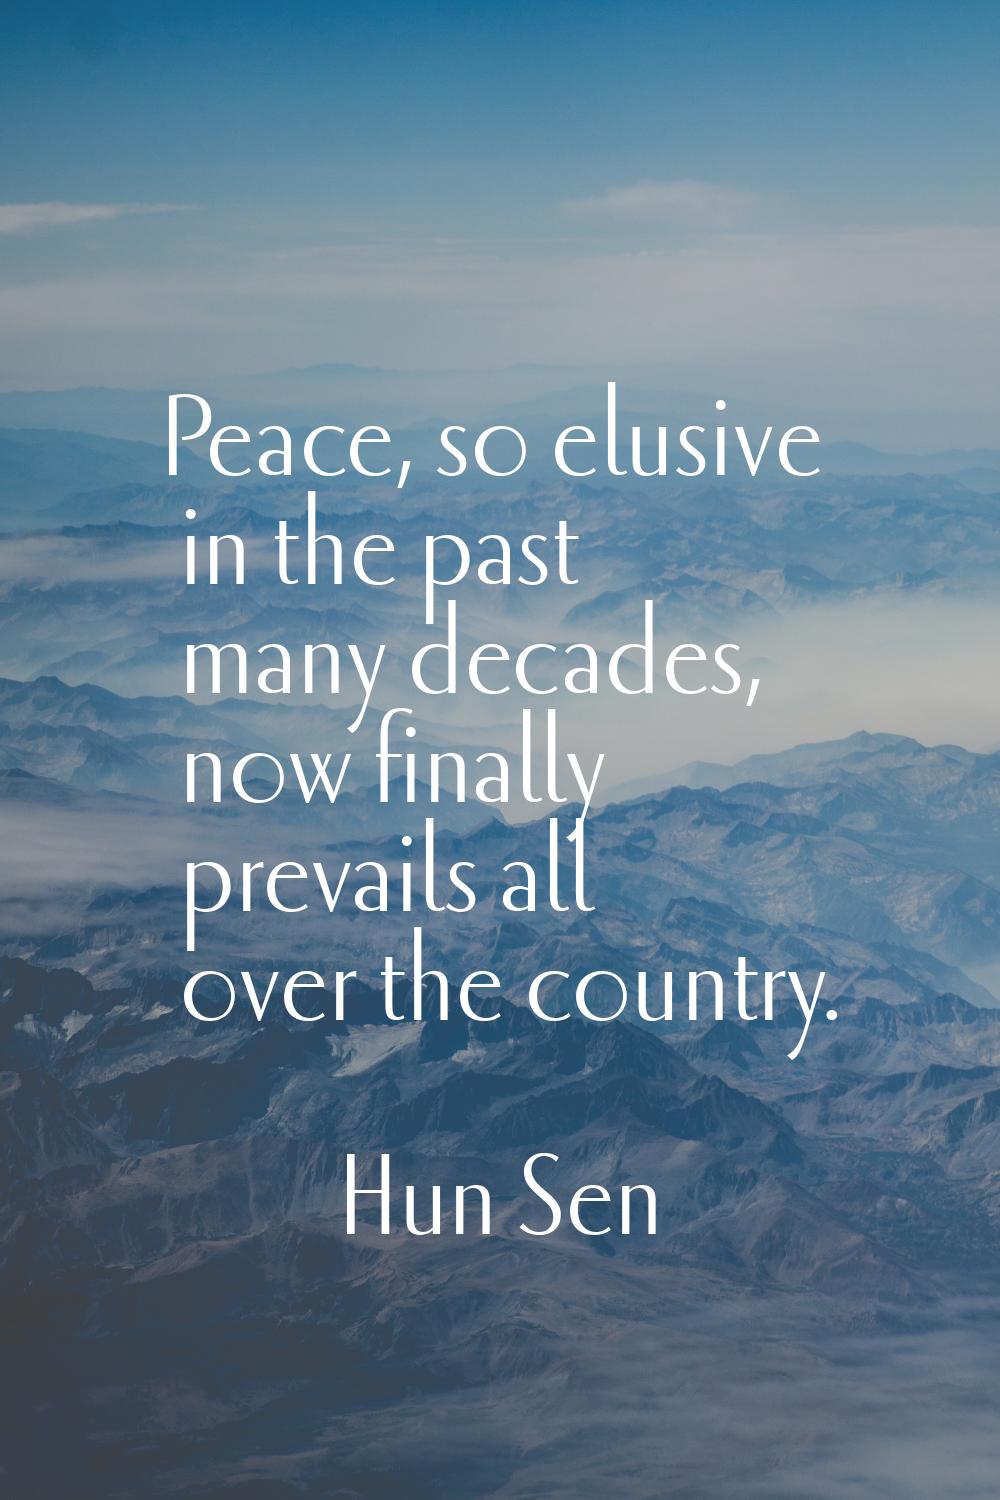 Peace, so elusive in the past many decades, now finally prevails all over the country.